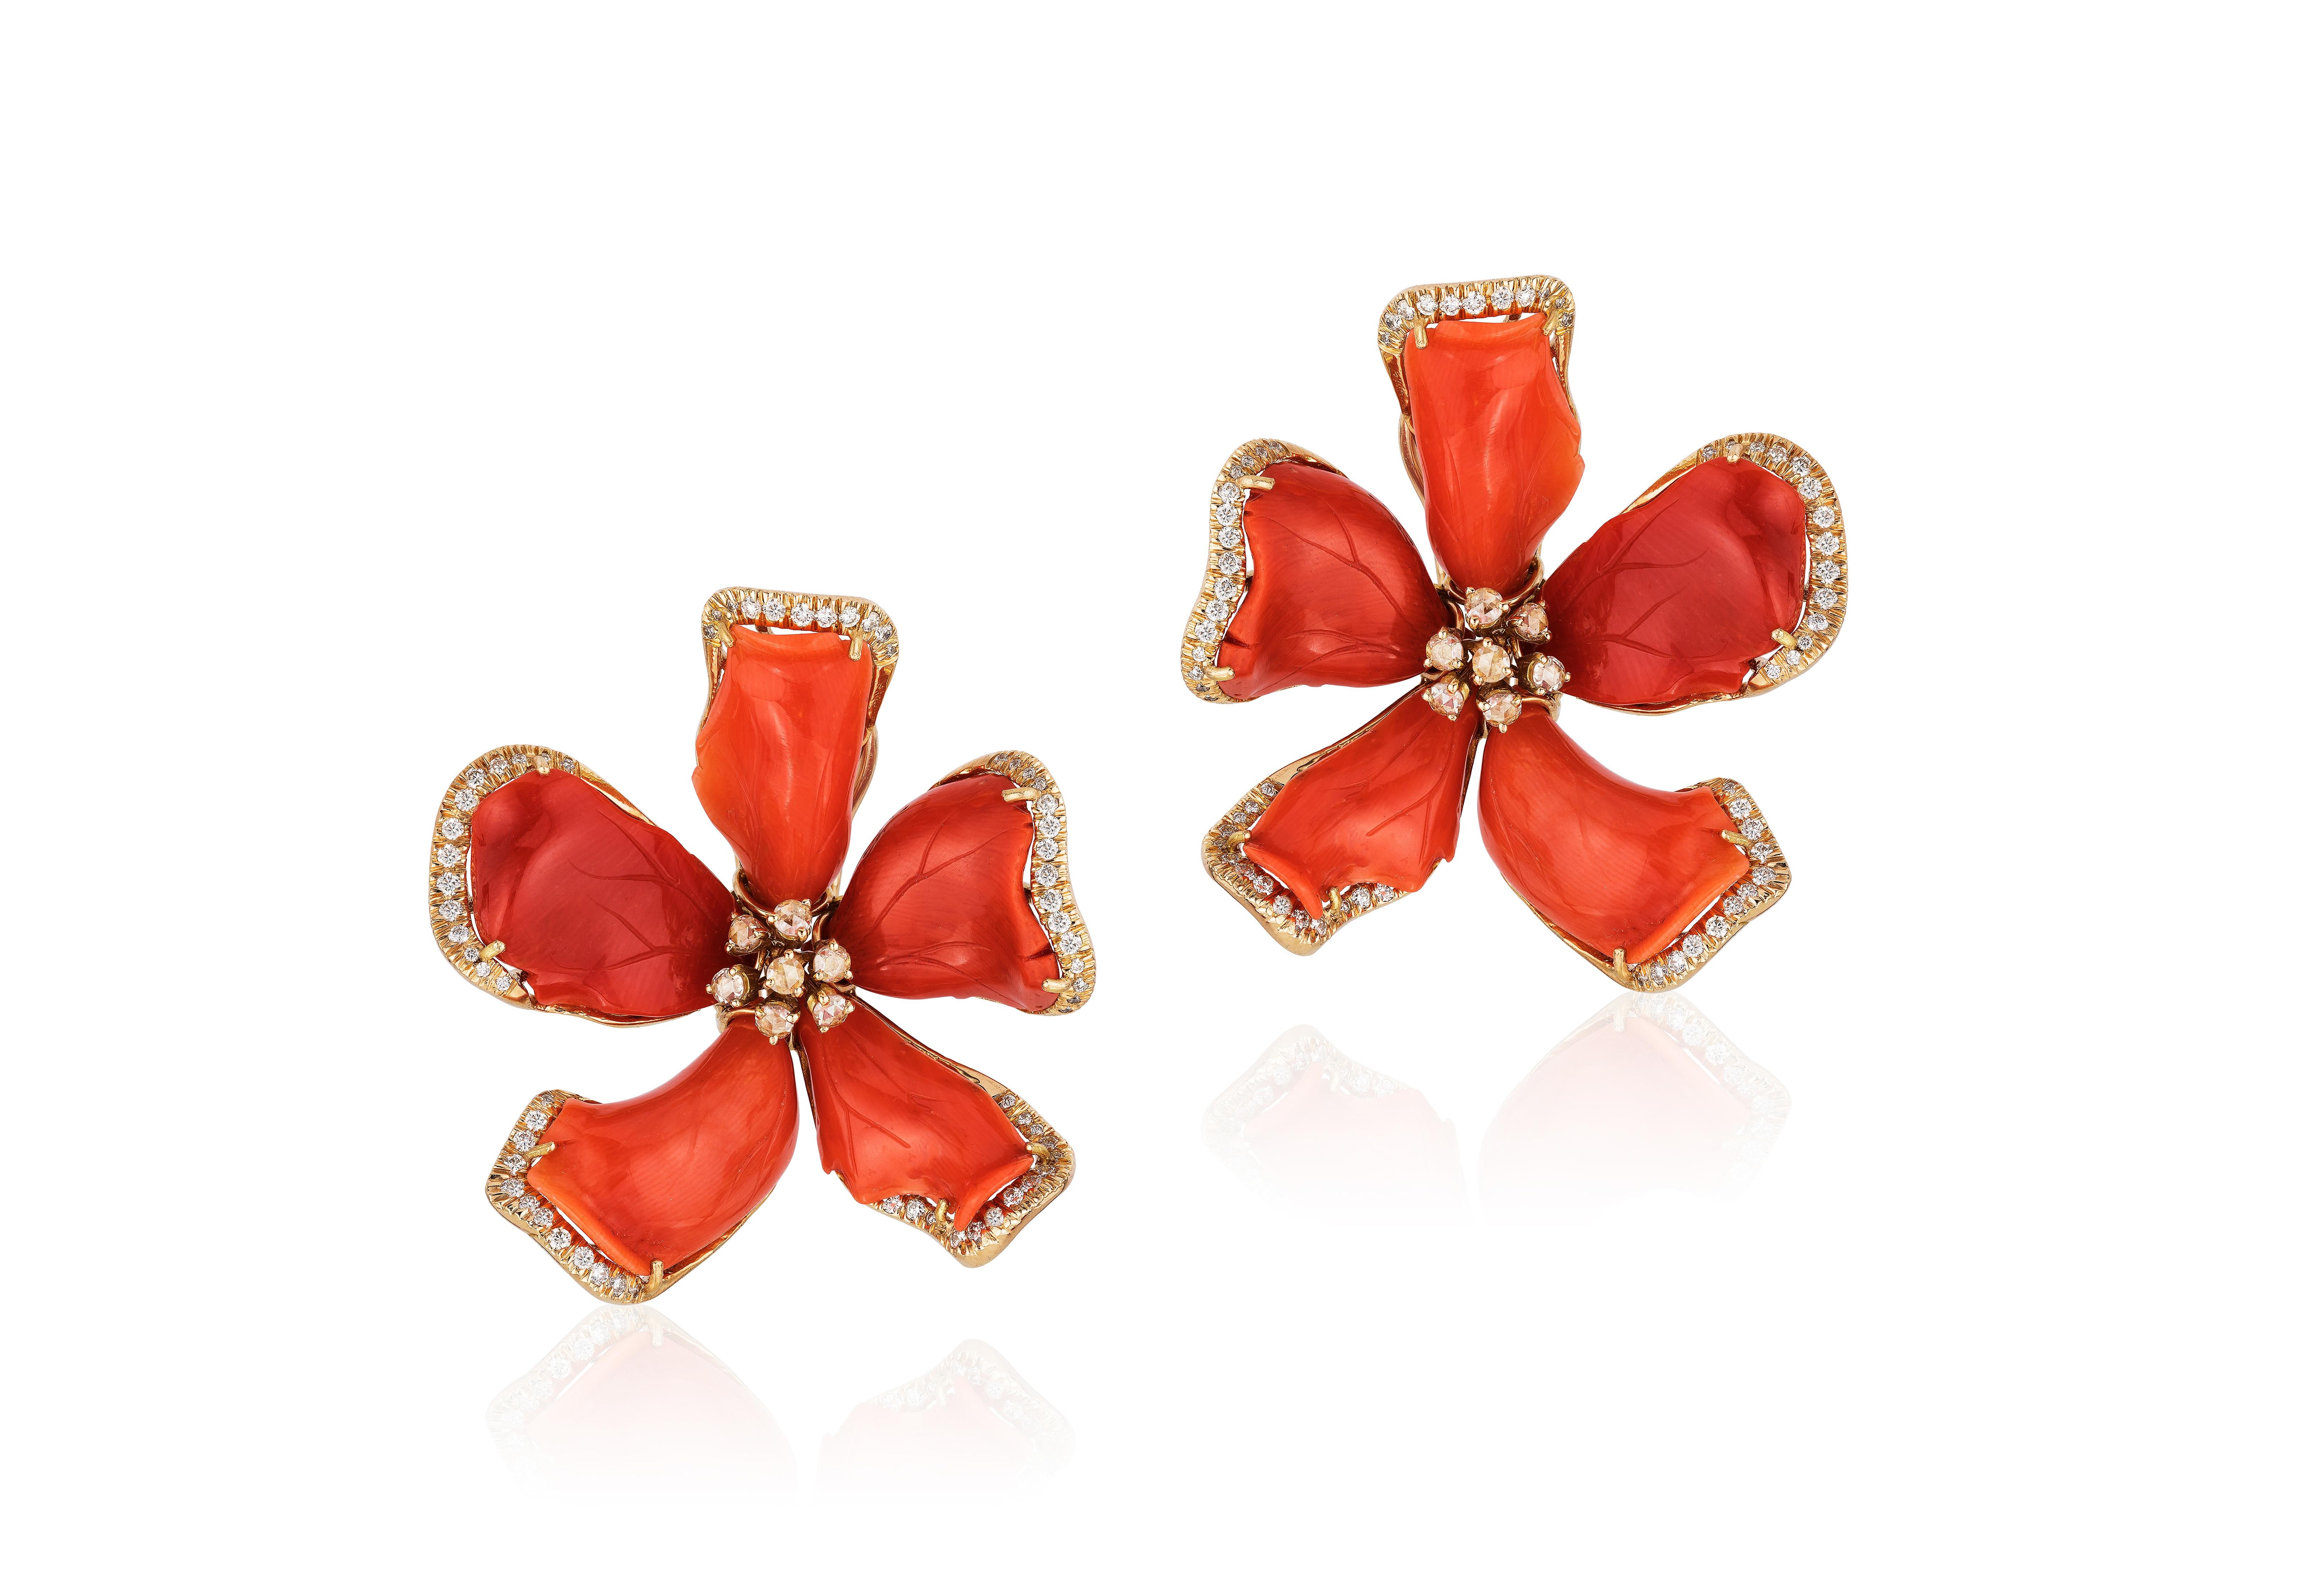 Large Red Coral Flower Earrings with Diamonds in 18k Yellow Gold, from 'G-One' Collection

Gemstone Weight: 65.47 Carats

Diamond G-H / VS, Approx Wt: 1.99 Carats